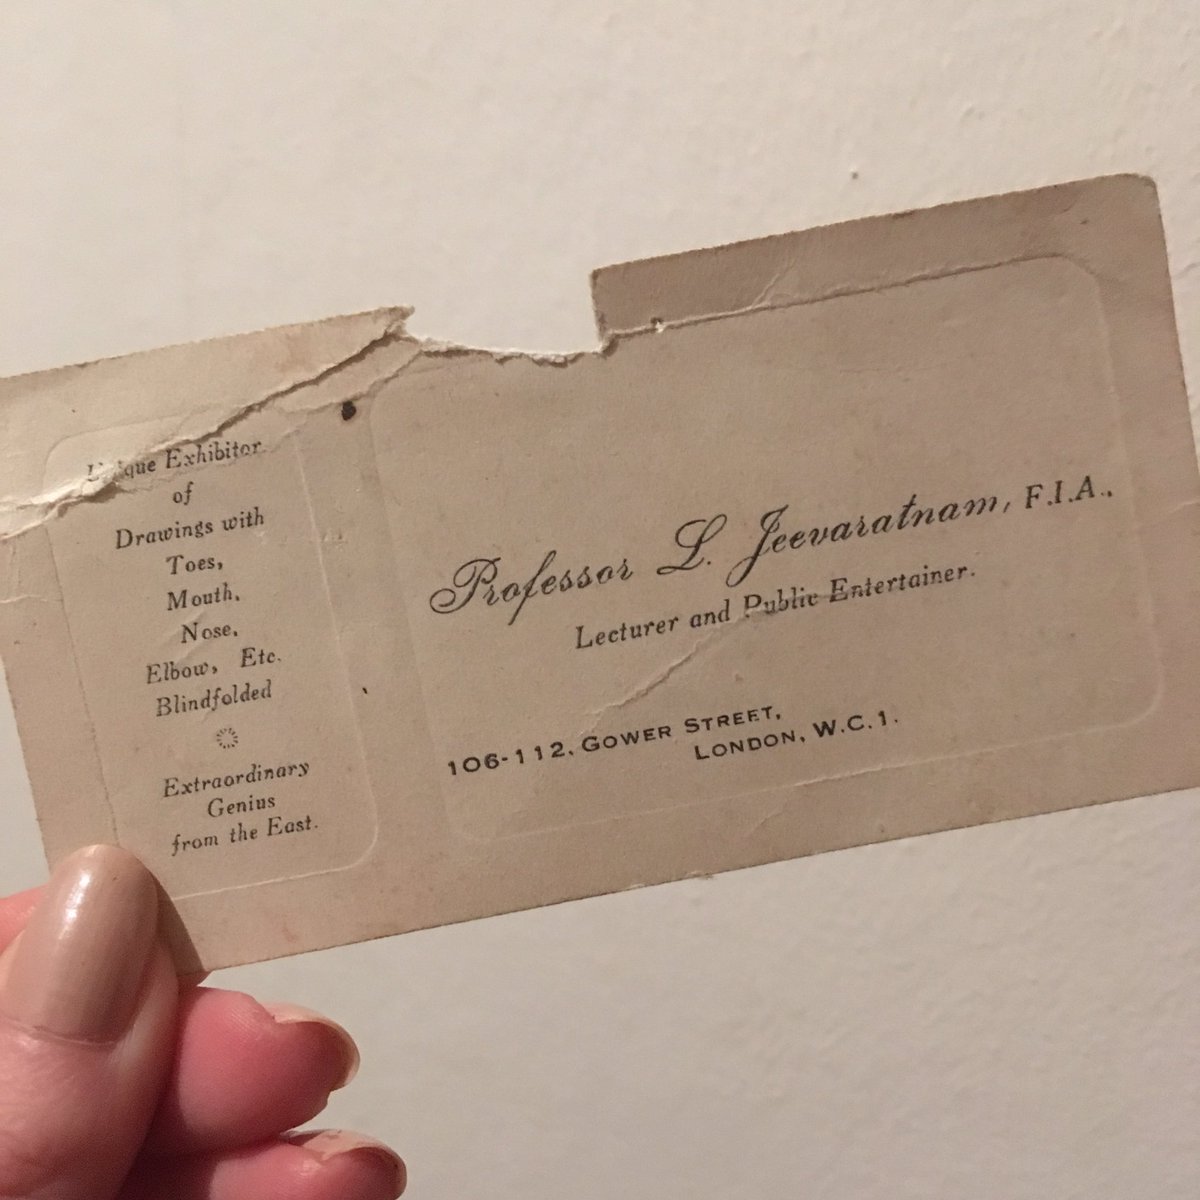 Found one of my great-grandfathers business cards while sorting out Grandads house last week. #mouthpainting #gowerstreet #london #familyhistory #ancestry #artist #jeevaratnam